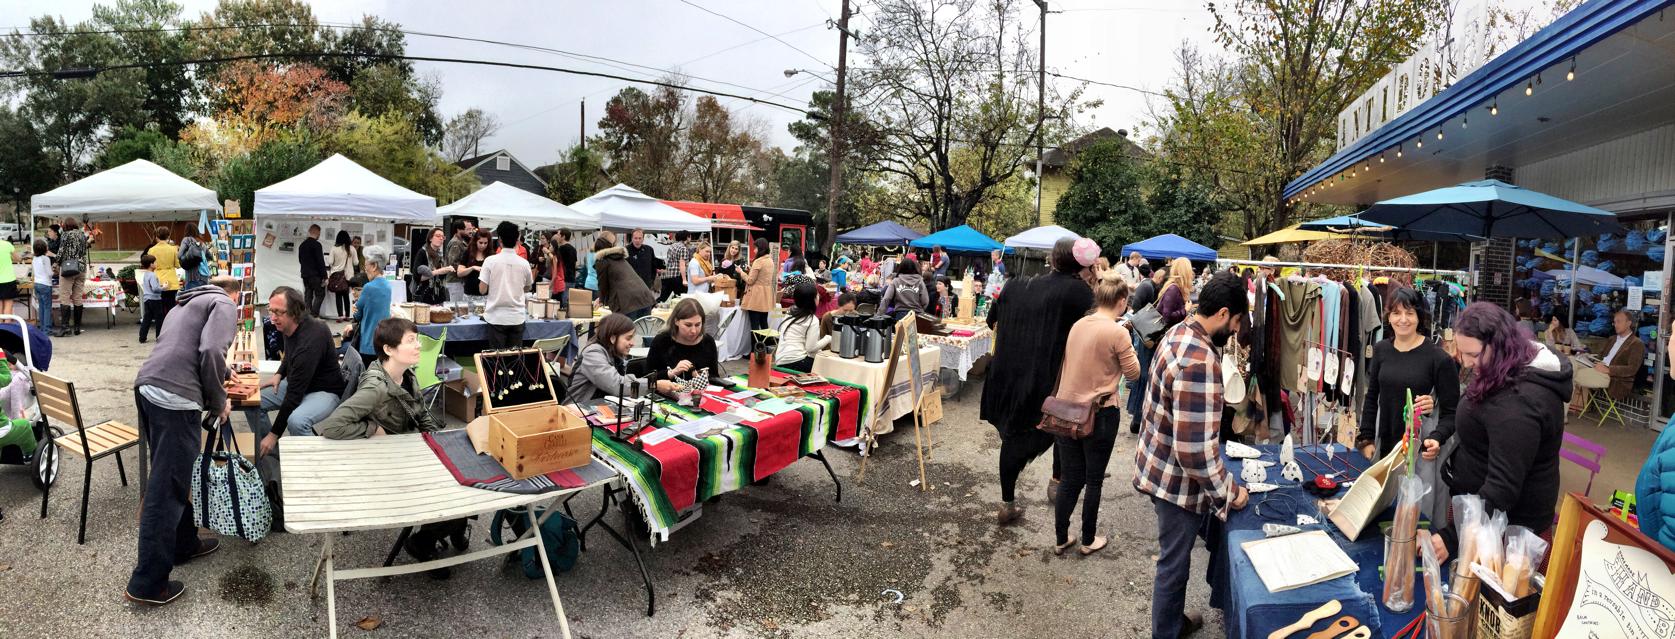 Artist Markets: Where to get Holiday Gifts in Texas